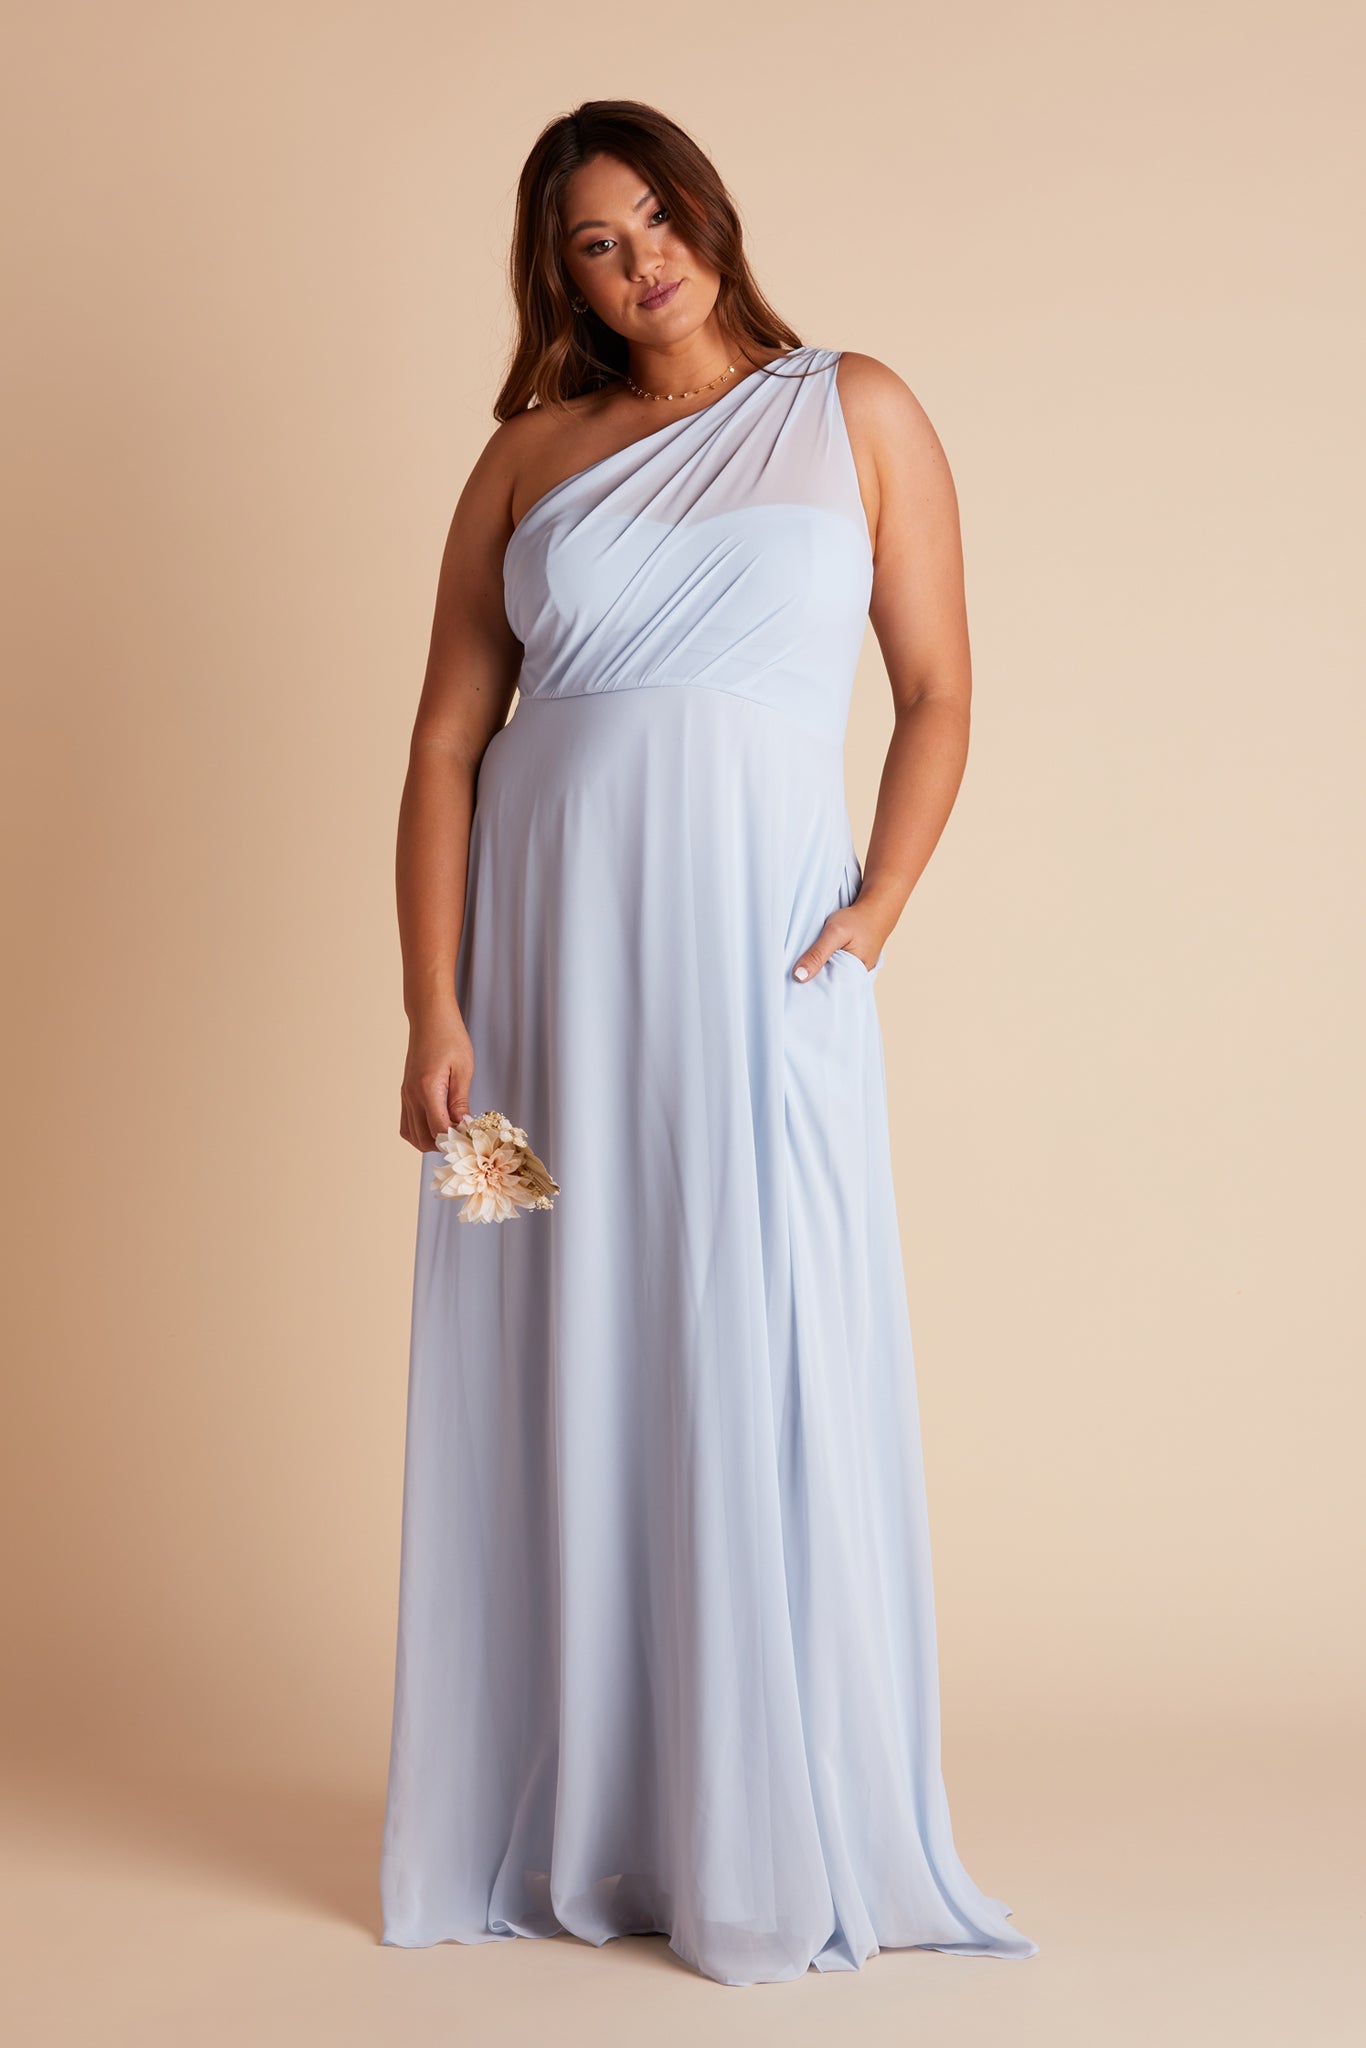 Kira plus size bridesmaids dress in ice blue chiffon by Birdy Grey, front view with hand in pocket